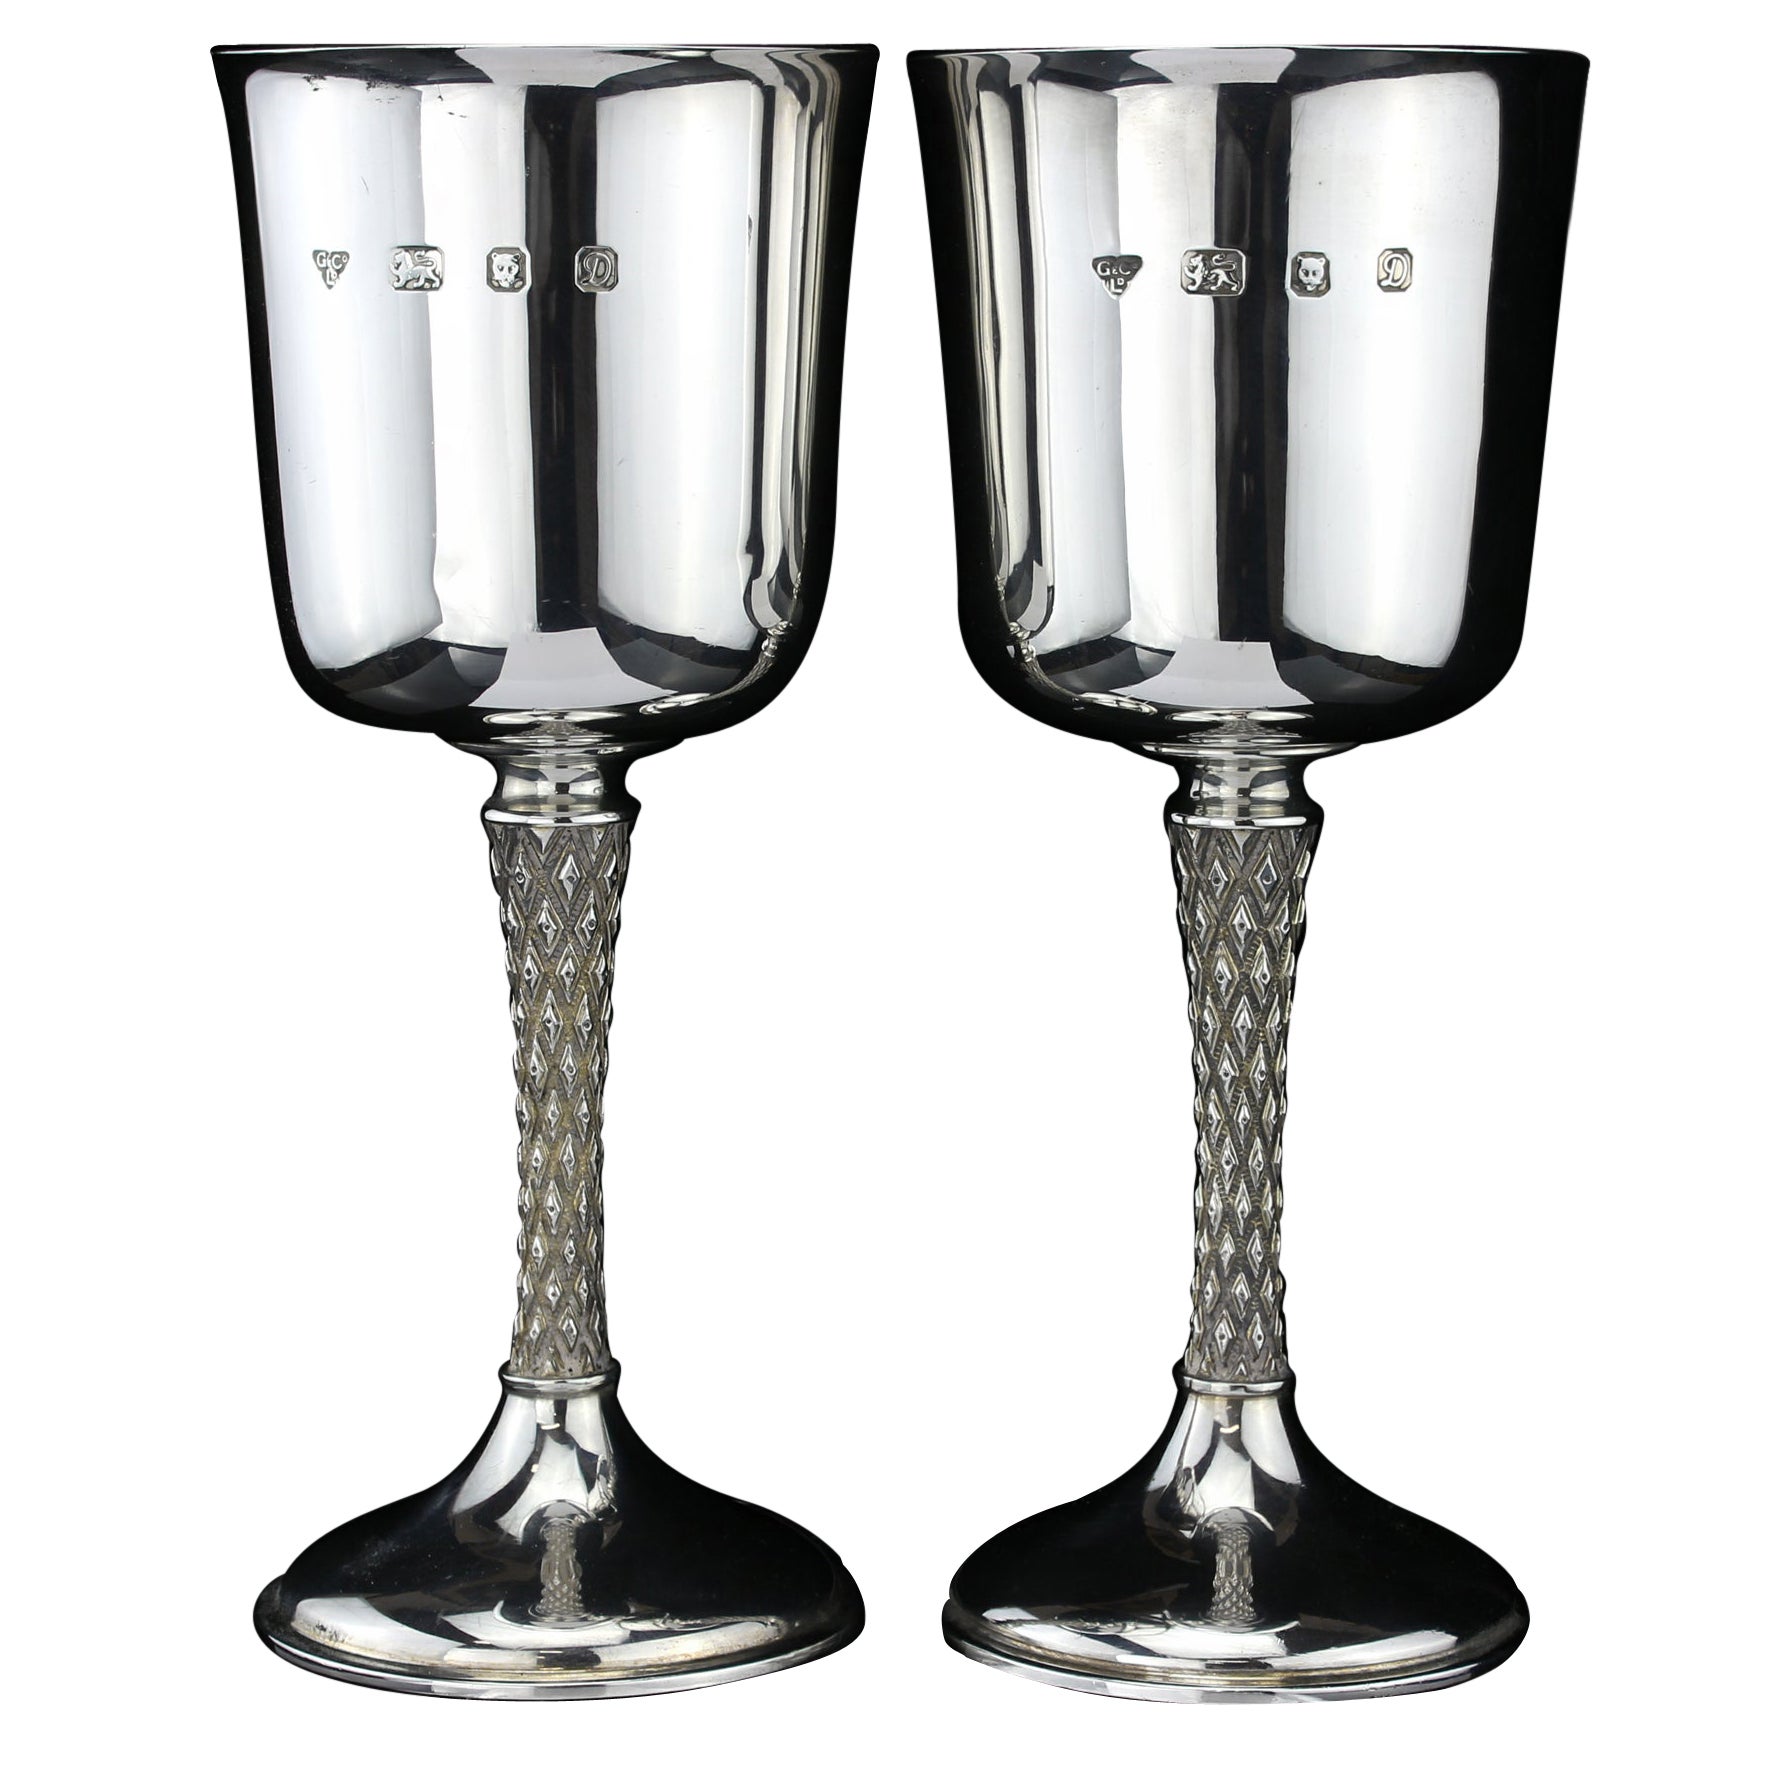 Vintage Pair of Sterling Silver Goblets, Garrard & Co, Designed by Anthony Elson